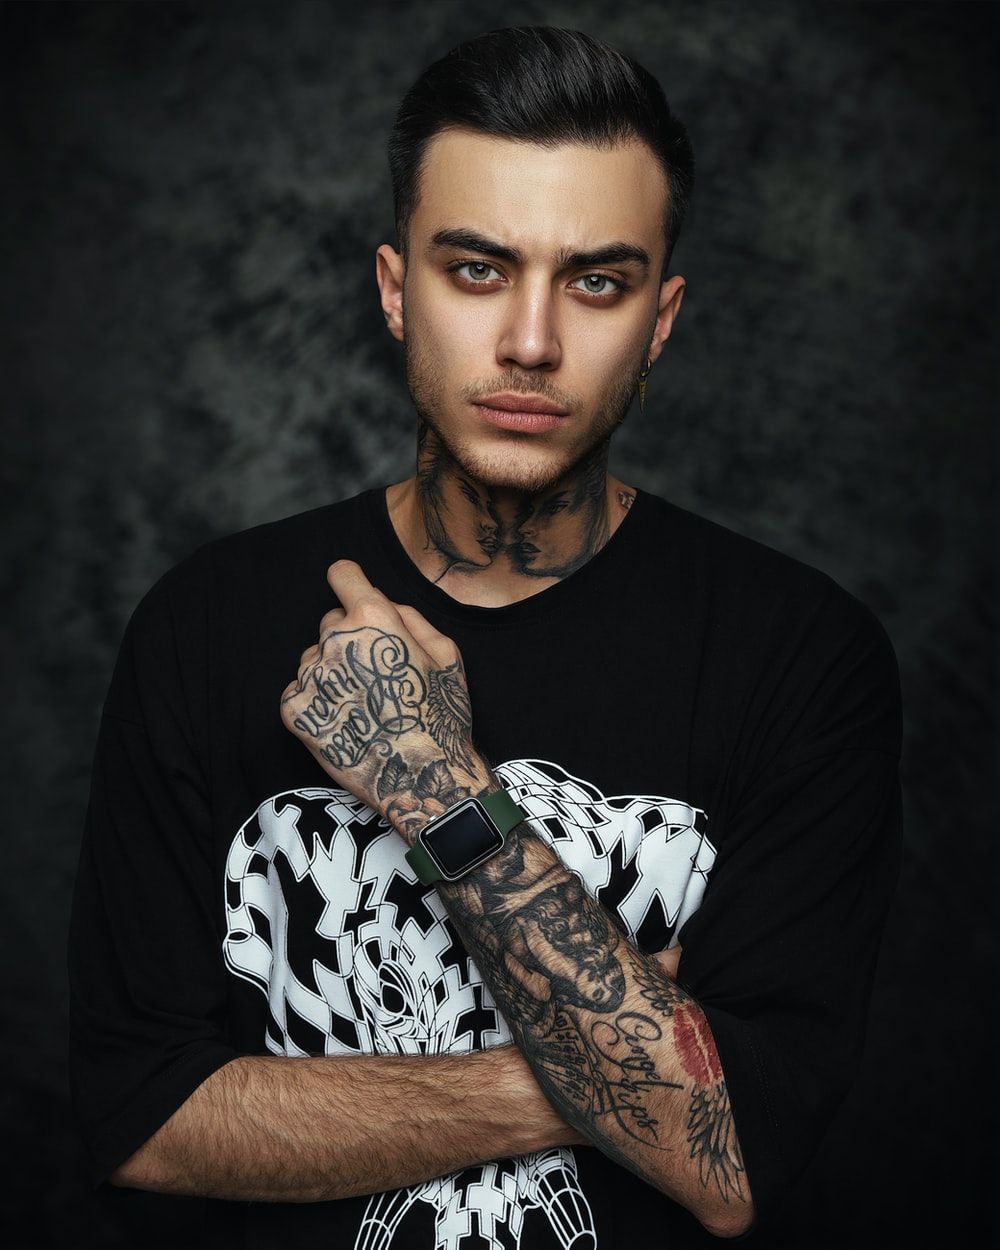 Tattoo Boy Picture. Download Free Image